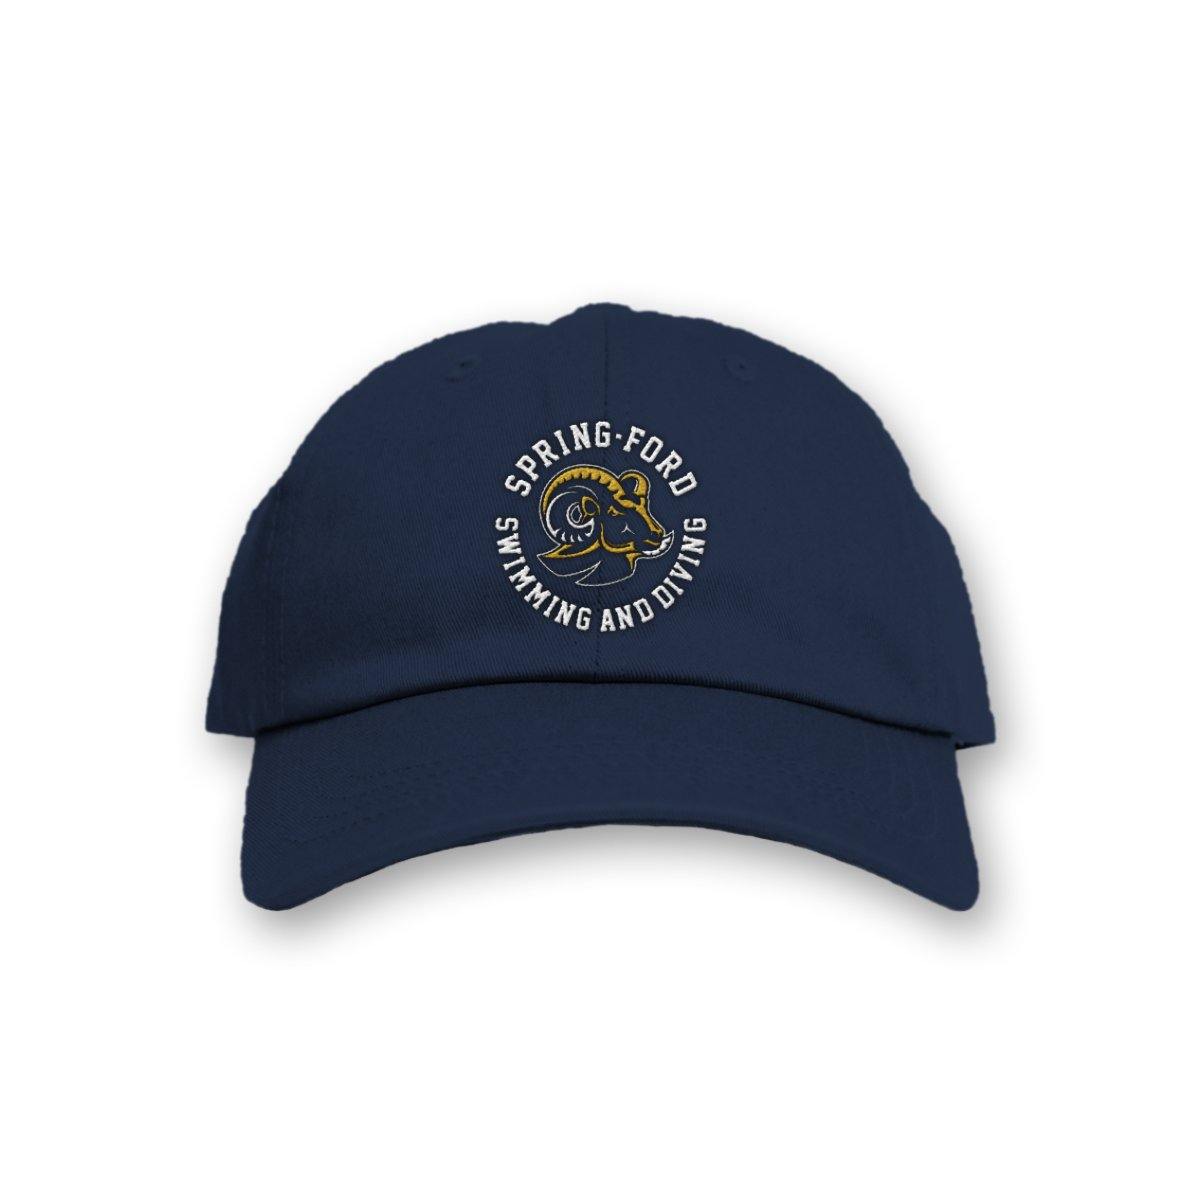 Buy Now – Spring Ford Swimming Diving Hat – Philly & Sports Merch – Cracked Bell